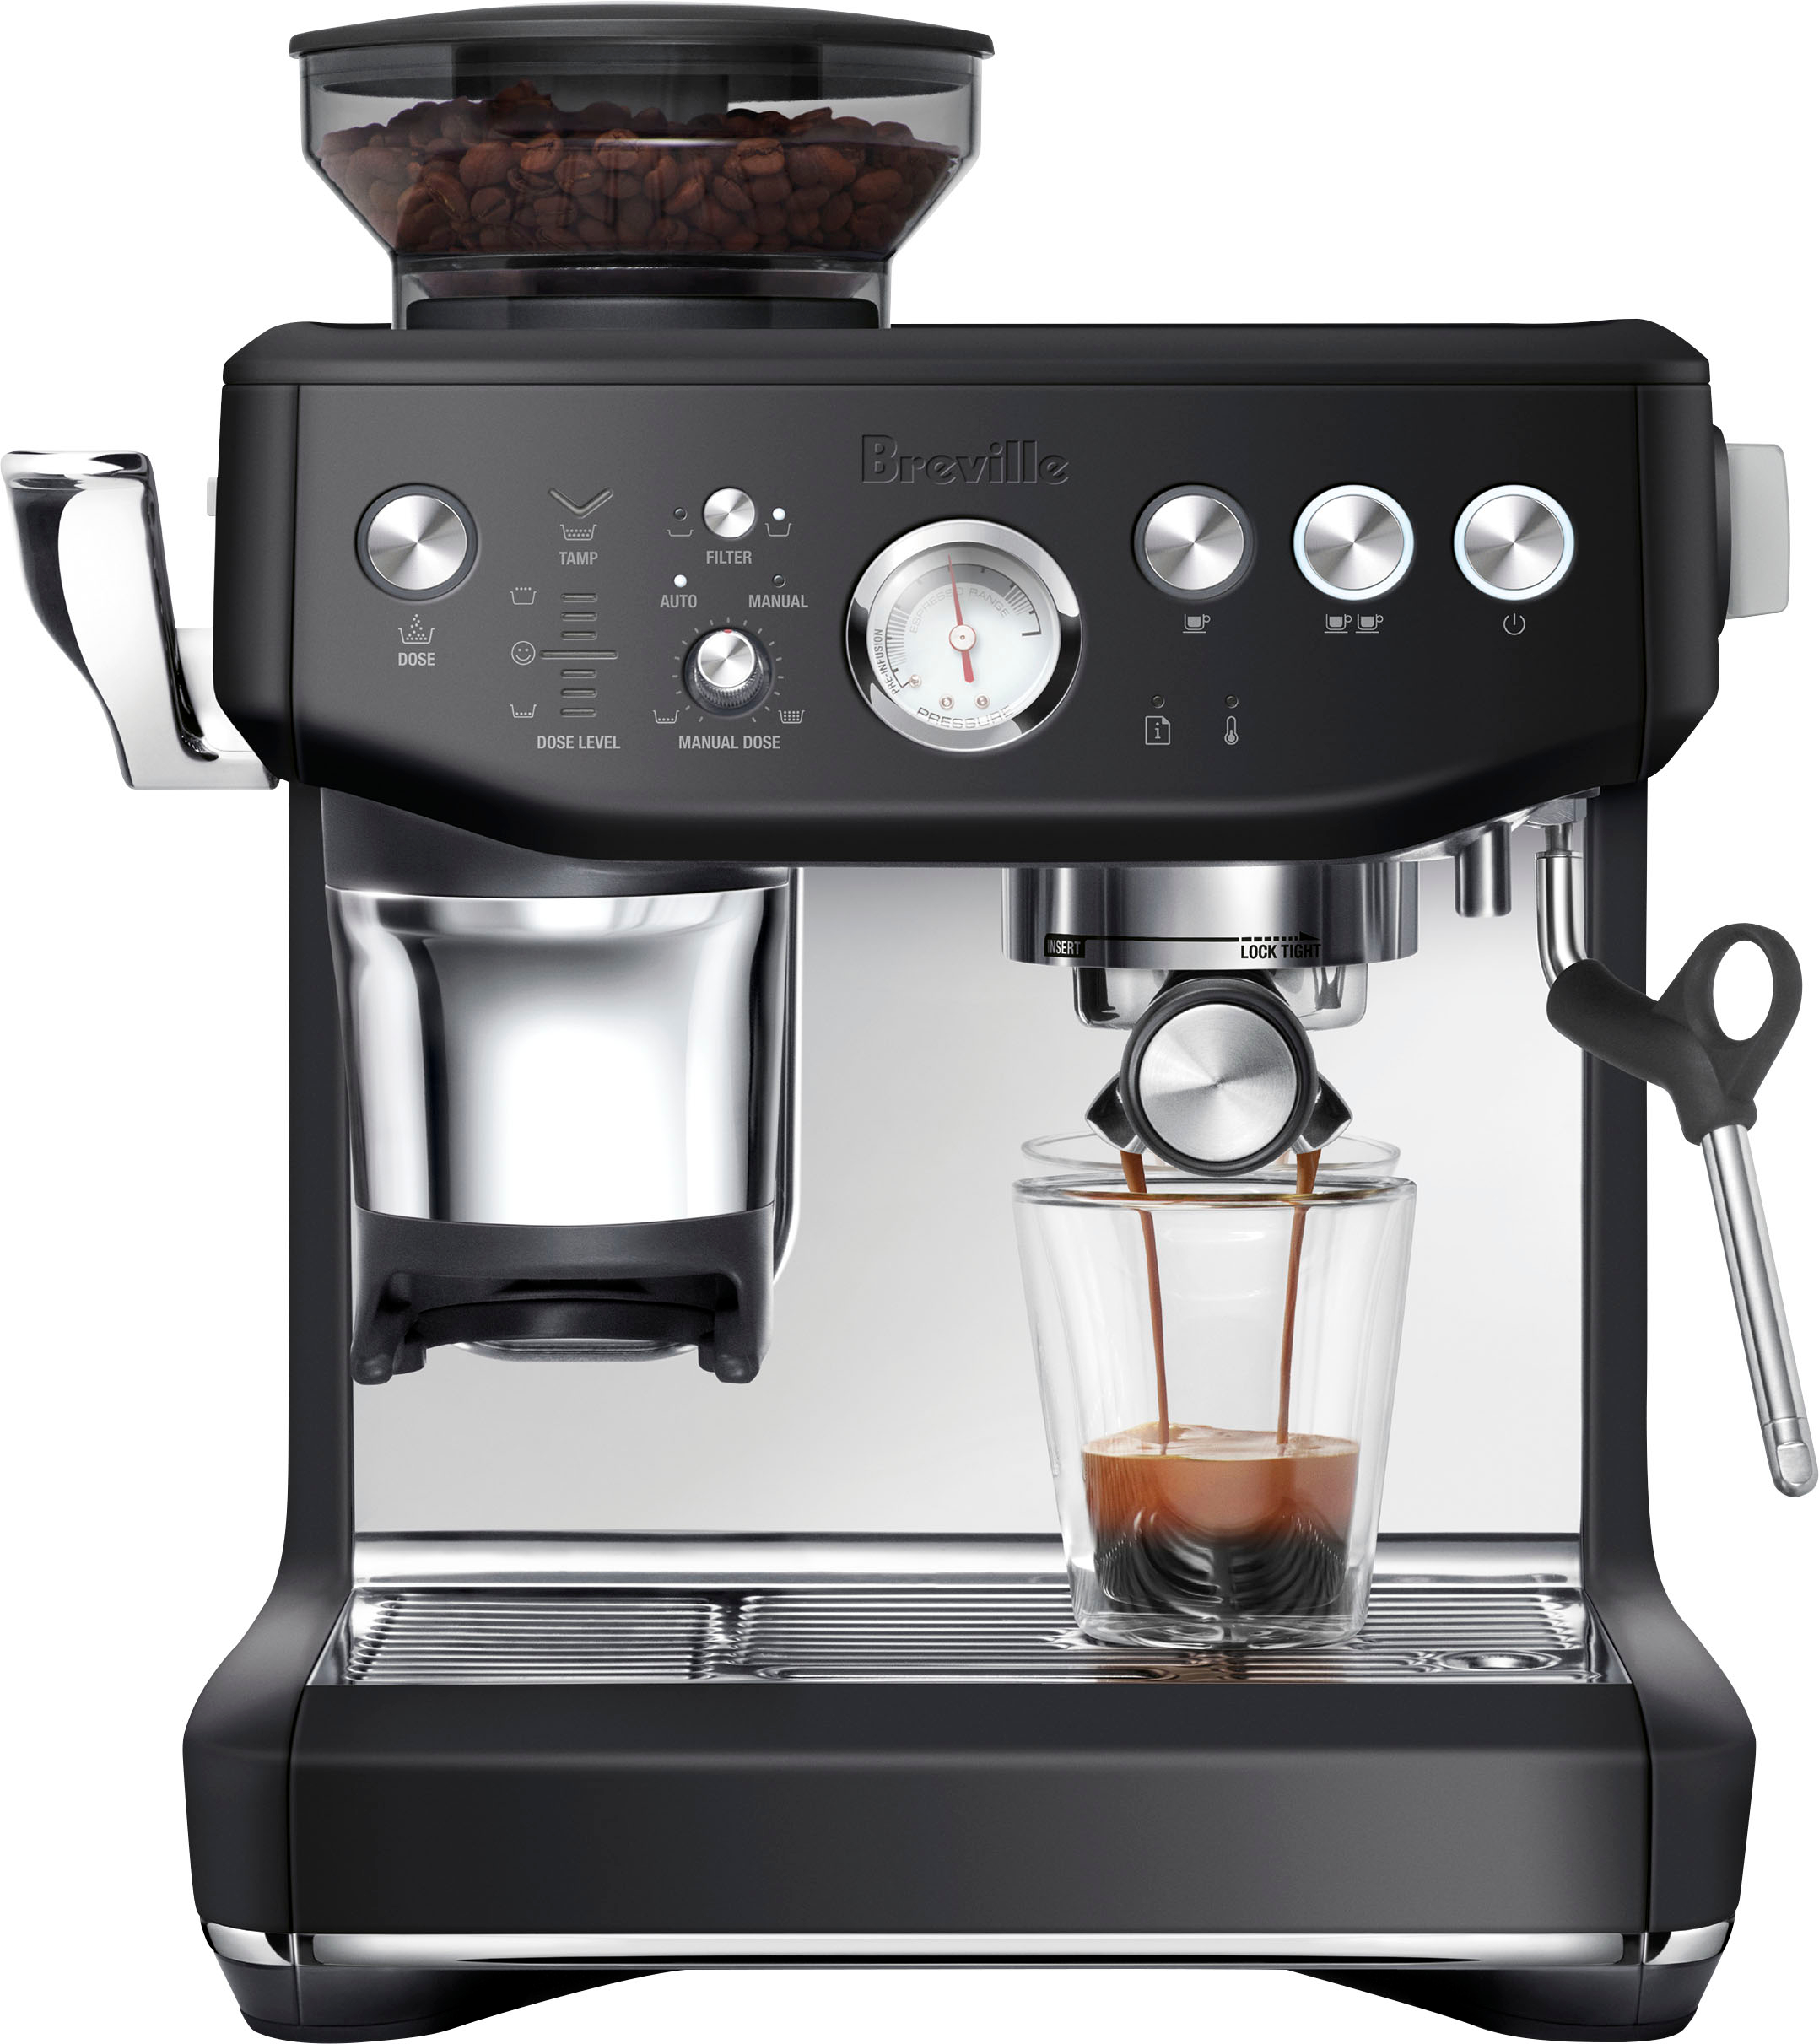 Breville Barista Express Impress Review: An Espresso Machine With